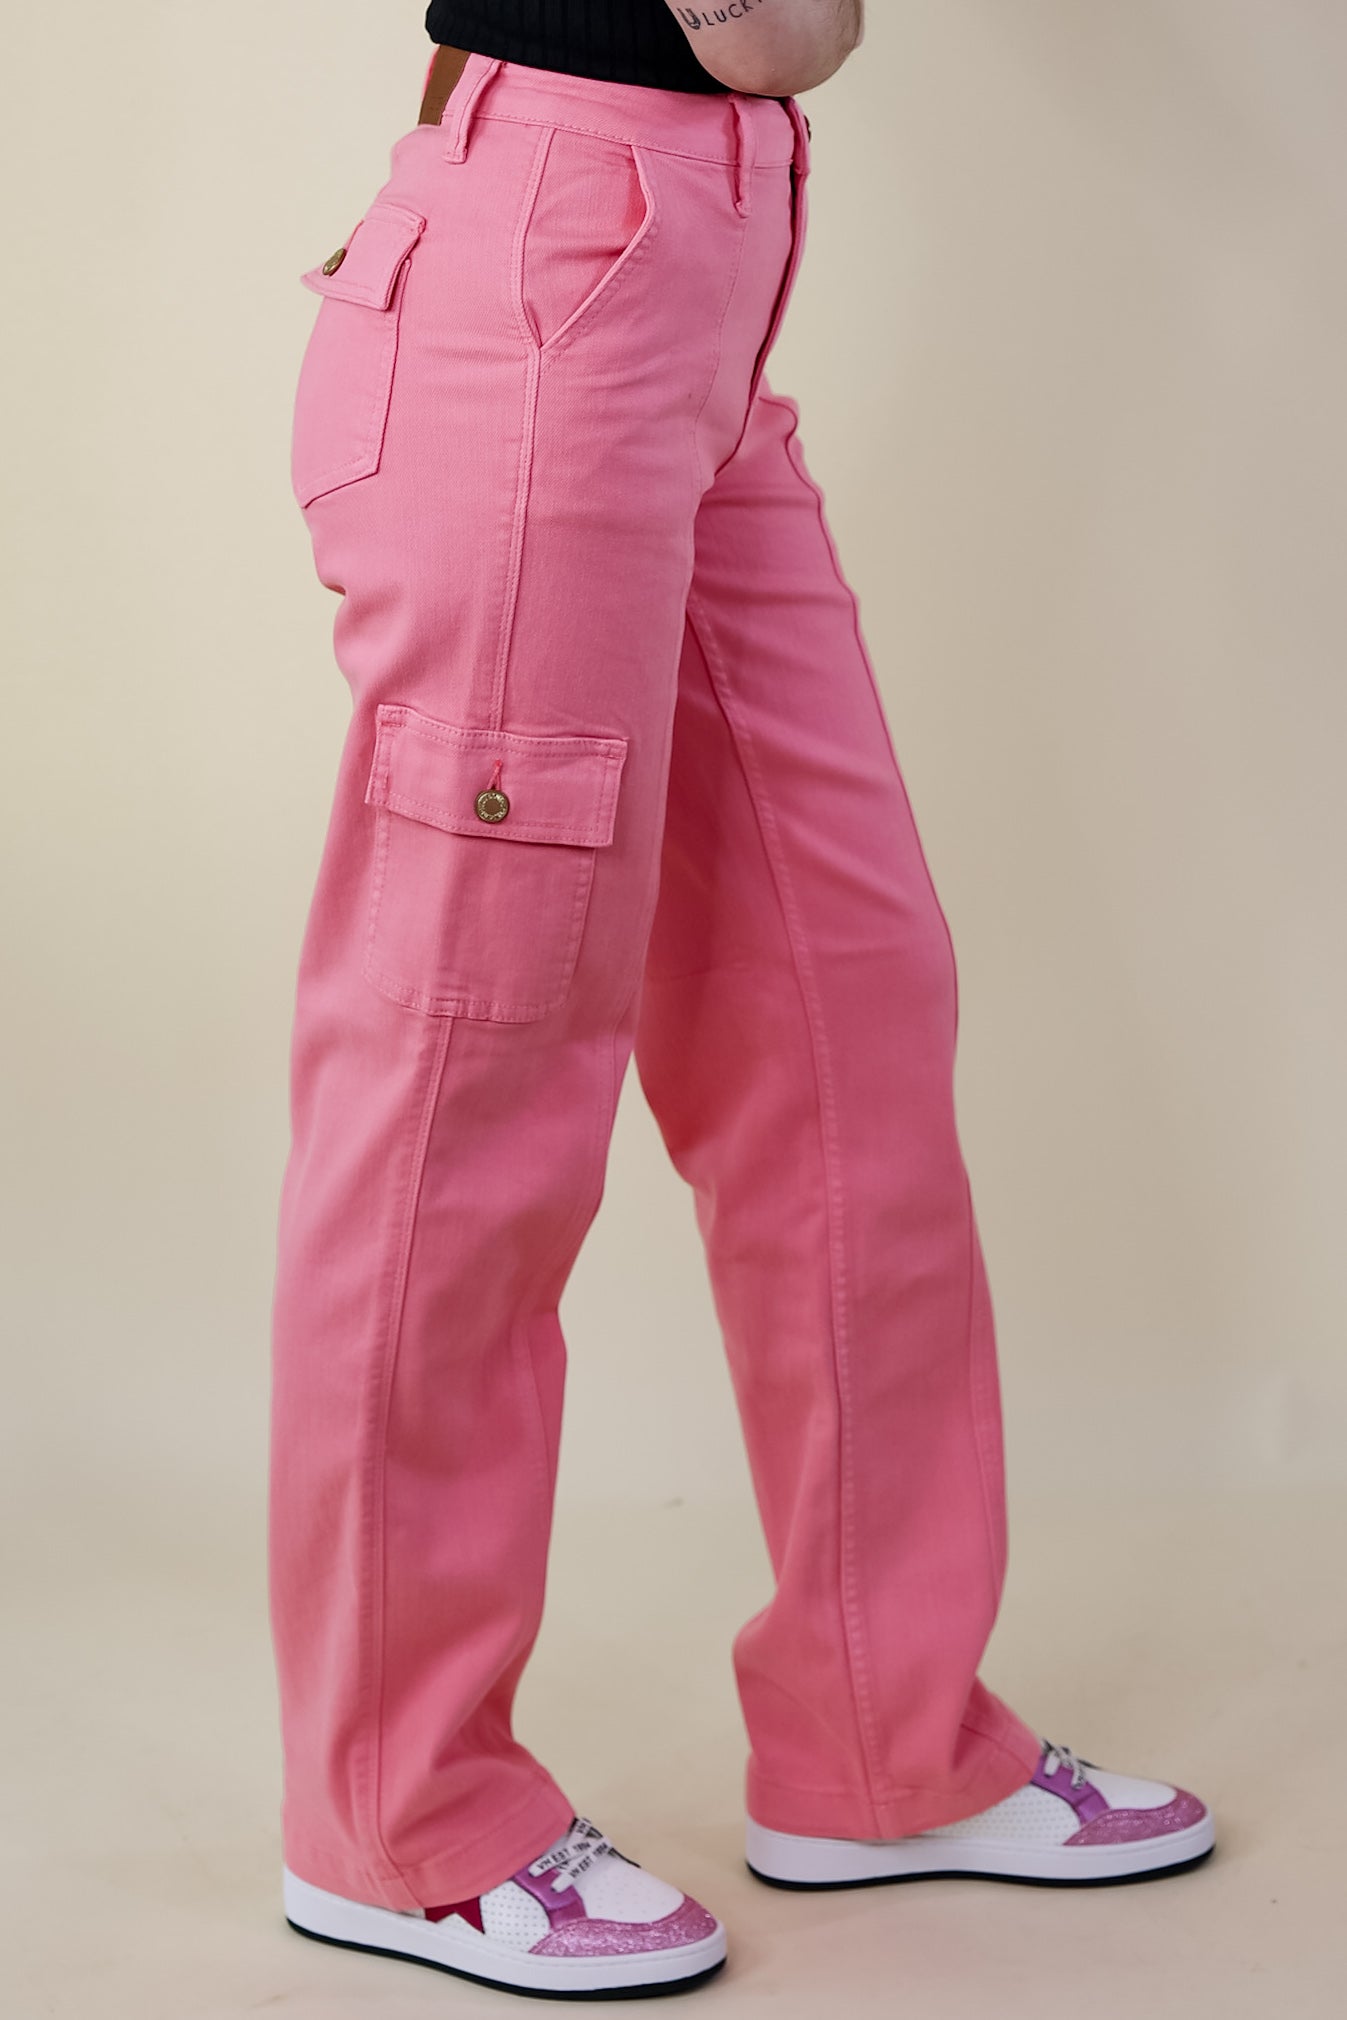 Judy Blue | Chic Efforts Cargo Straight Leg Jeans in Pink Wash - Giddy Up Glamour Boutique